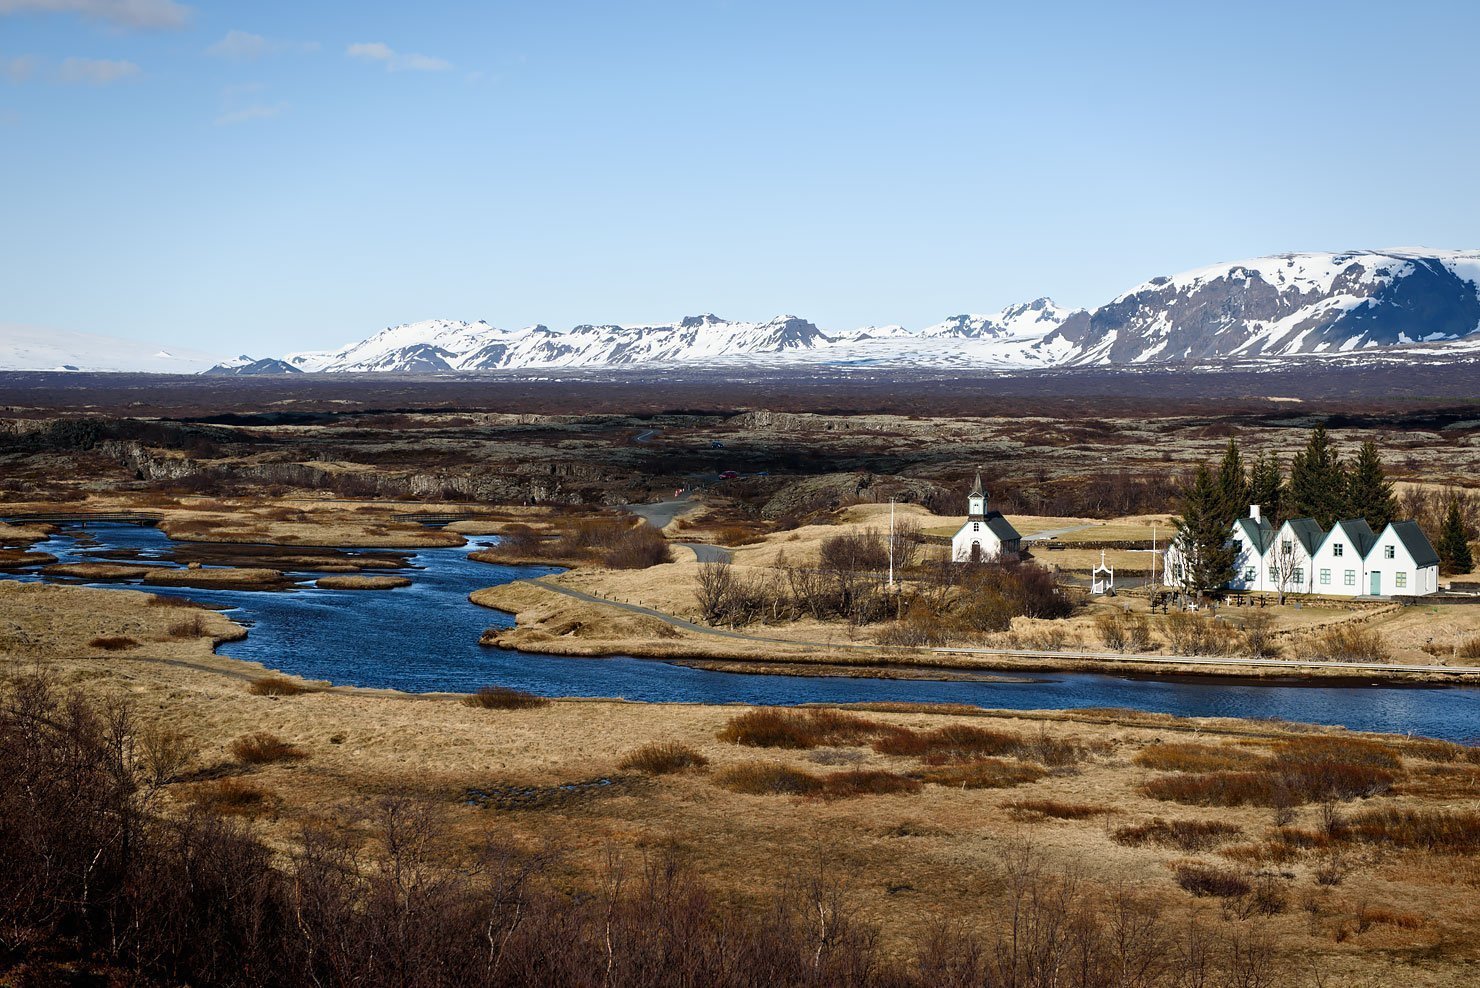 Road Trip in Iceland - The Golden Circle. Thingvellir National Park